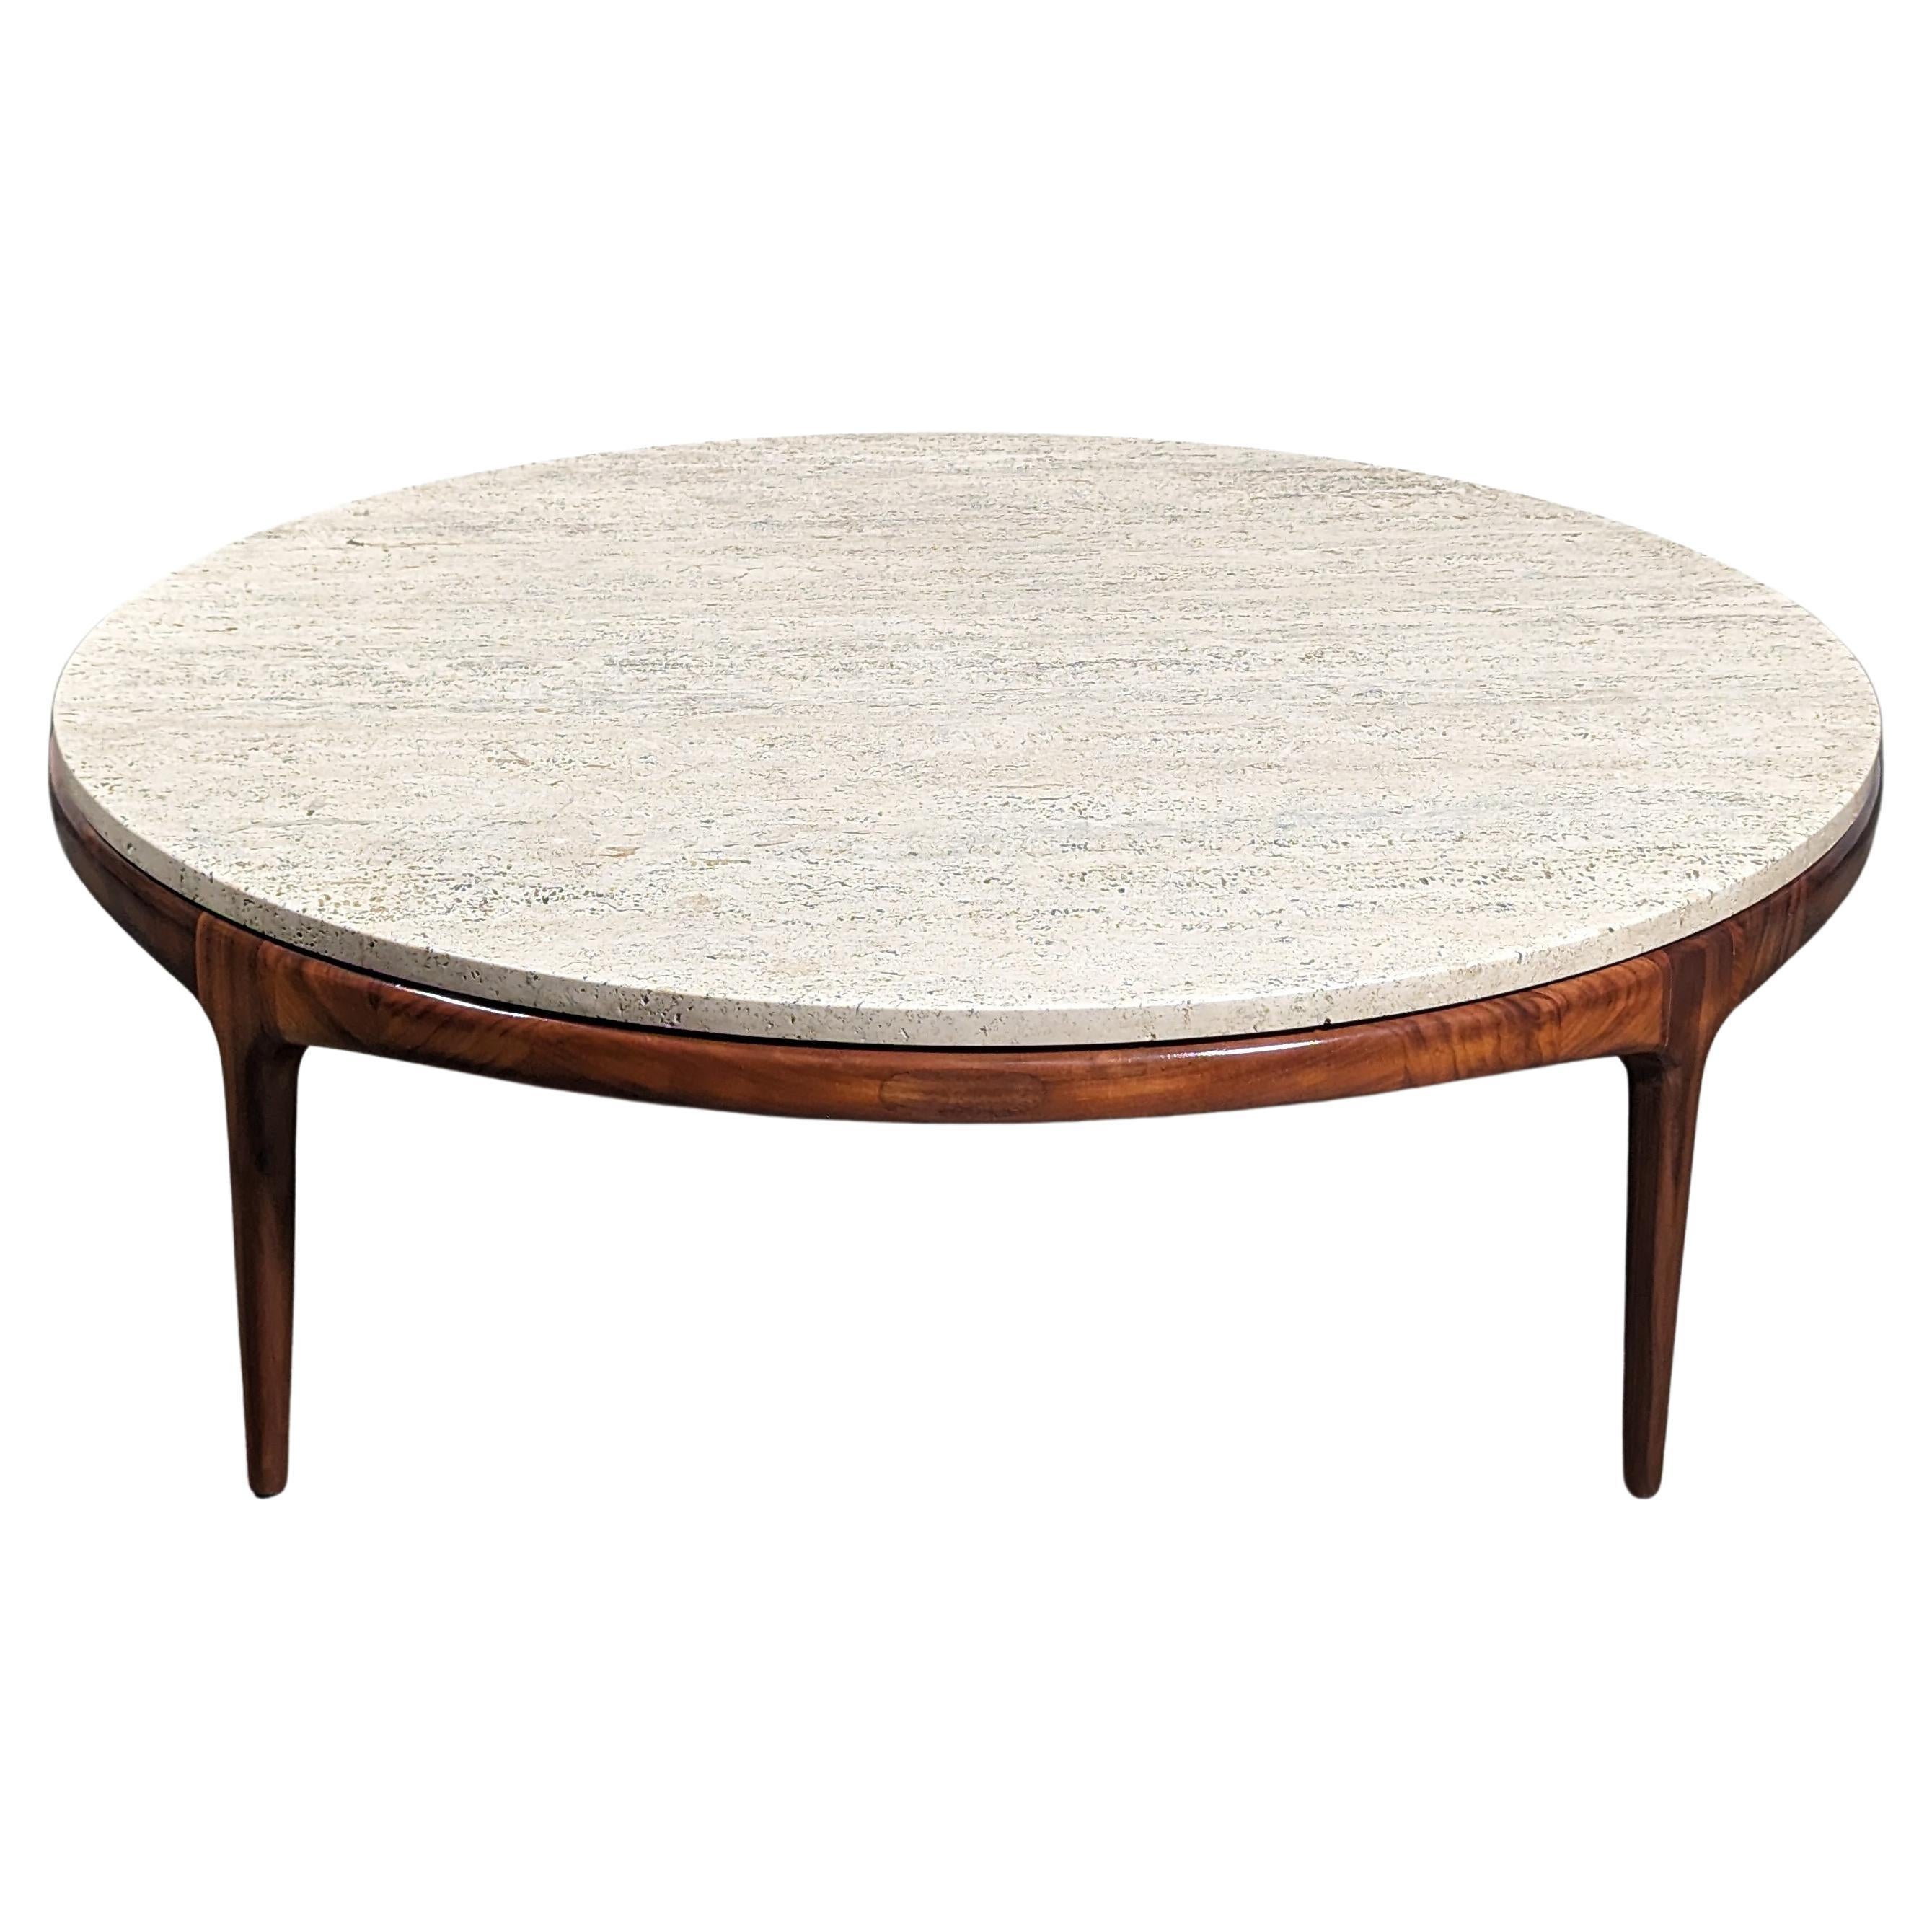 Mid Century Modern Walnut Rythm Coffee Table with Travertine Top by Lane, c1960s For Sale